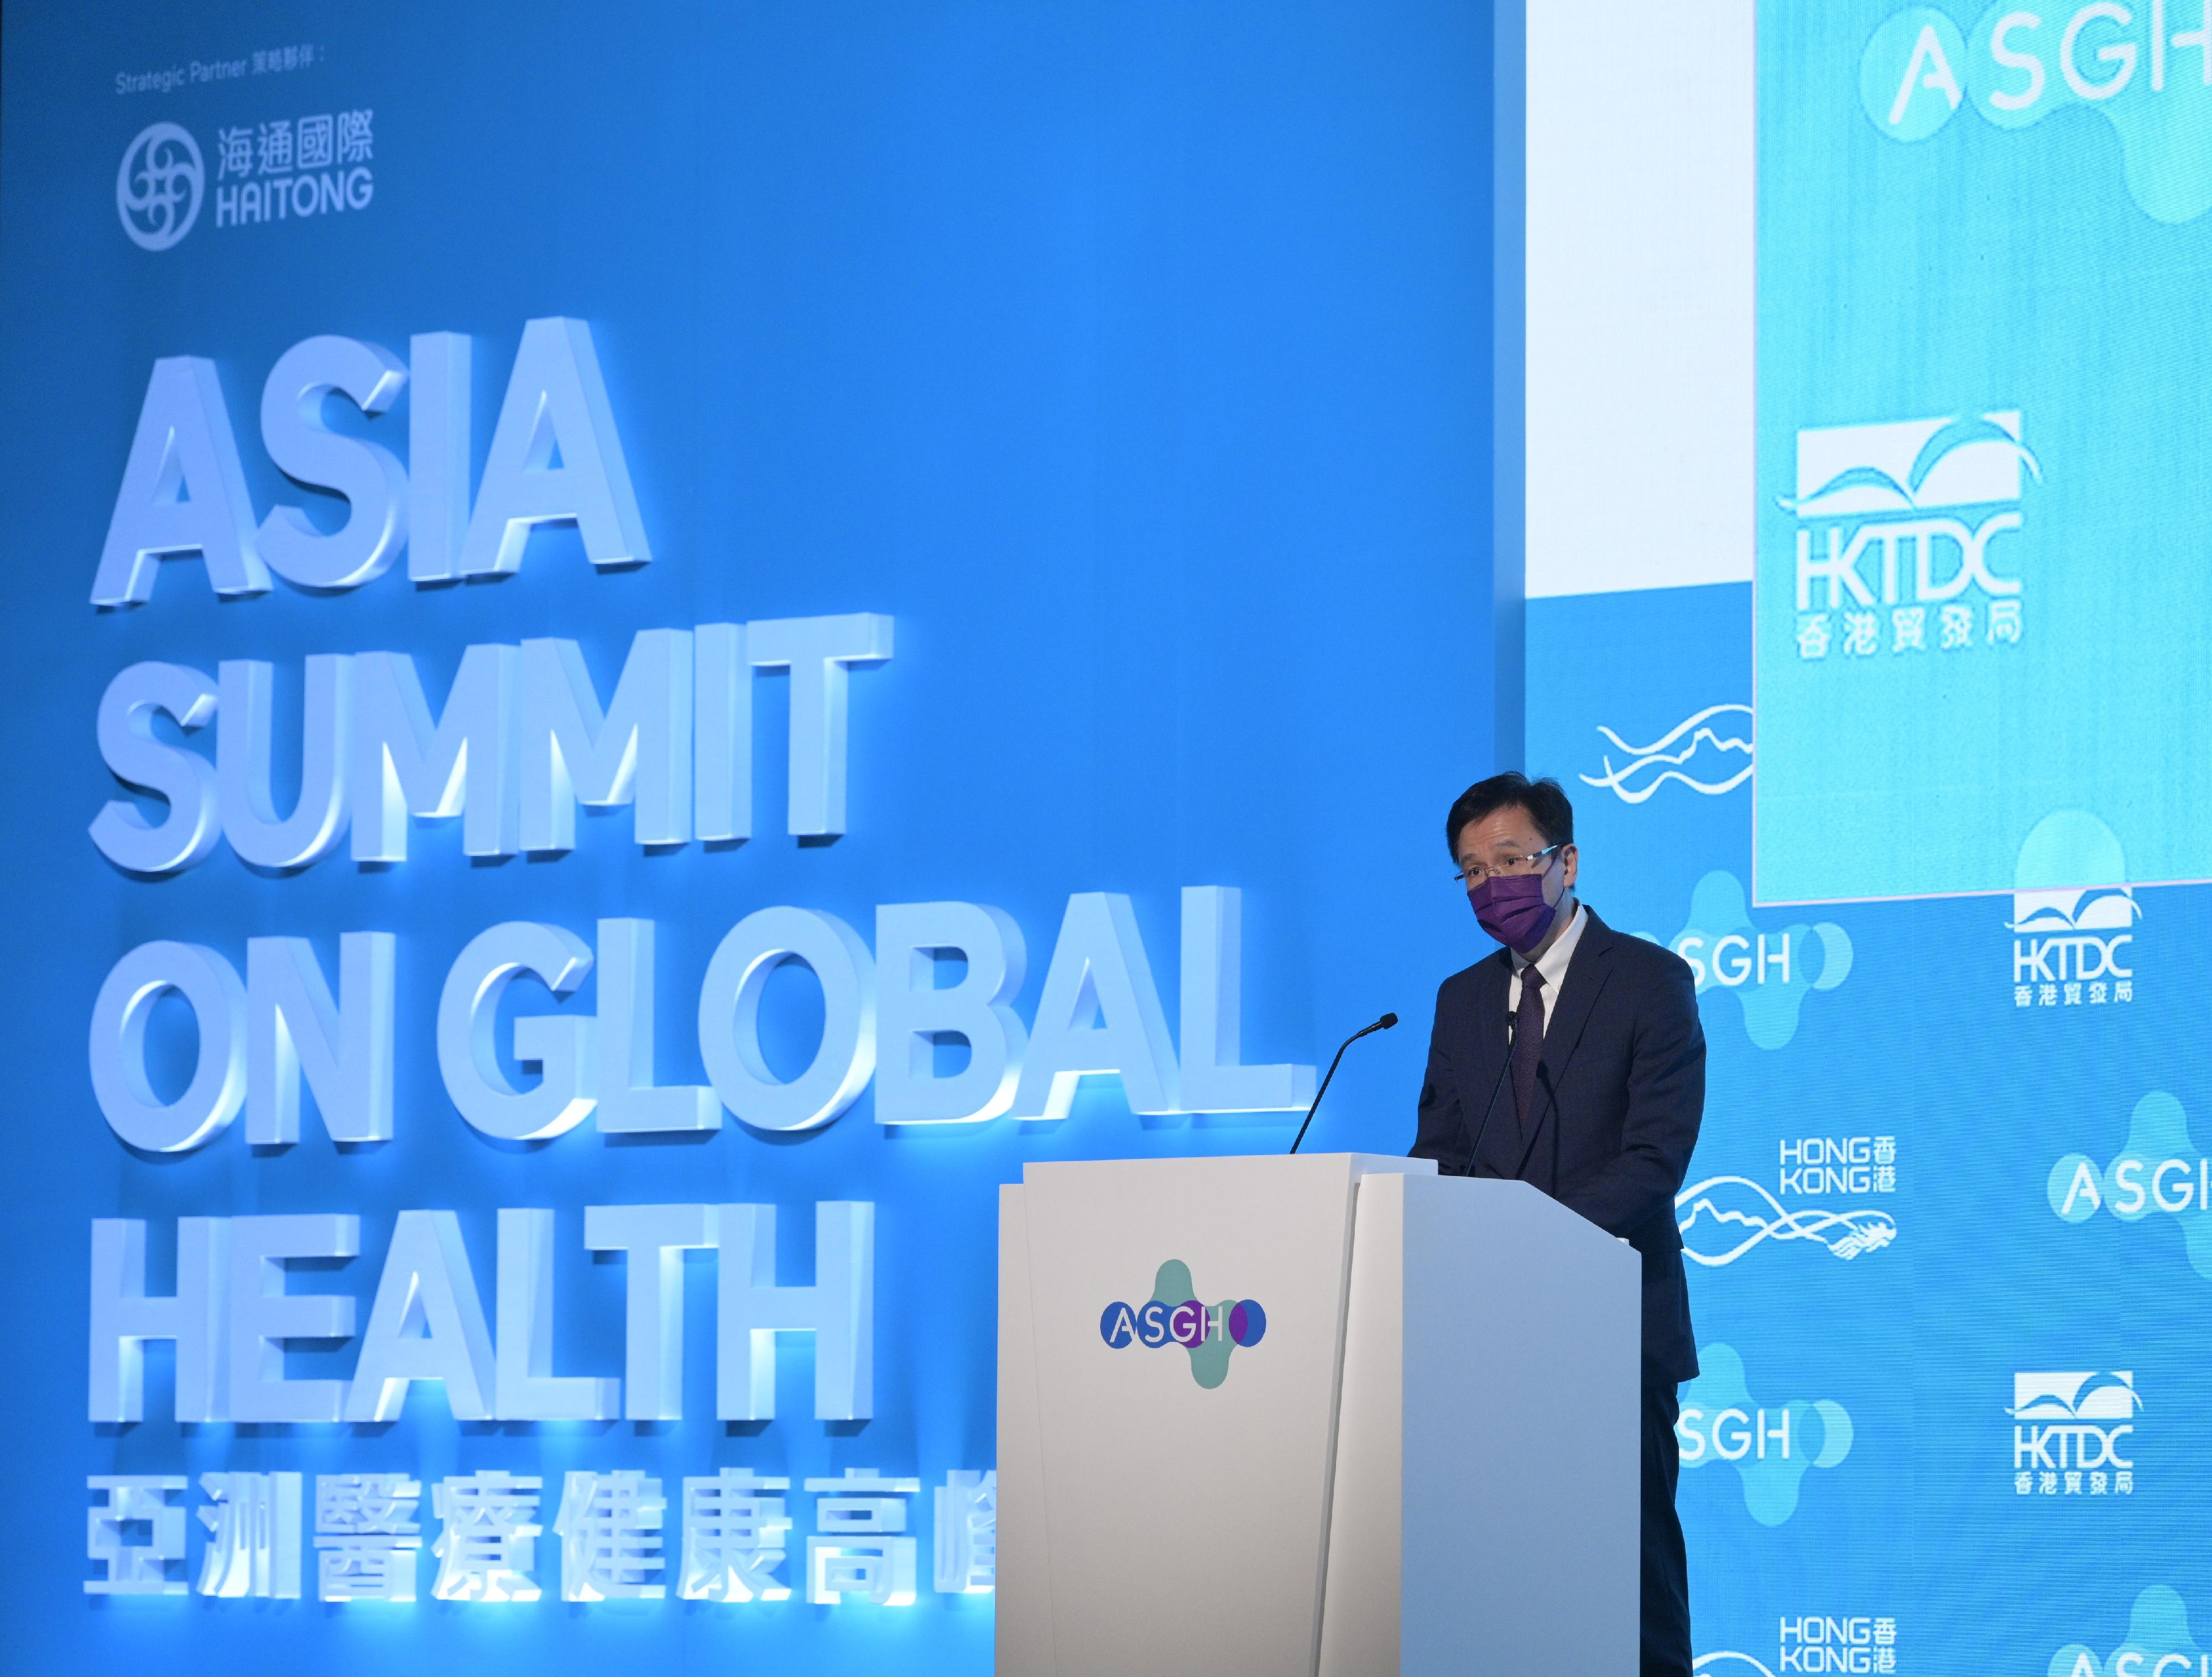 The Secretary for Innovation, Technology and Industry, Professor Sun Dong, speaks at the panel discussion session of the Asia Summit on Global Health today (November 10).